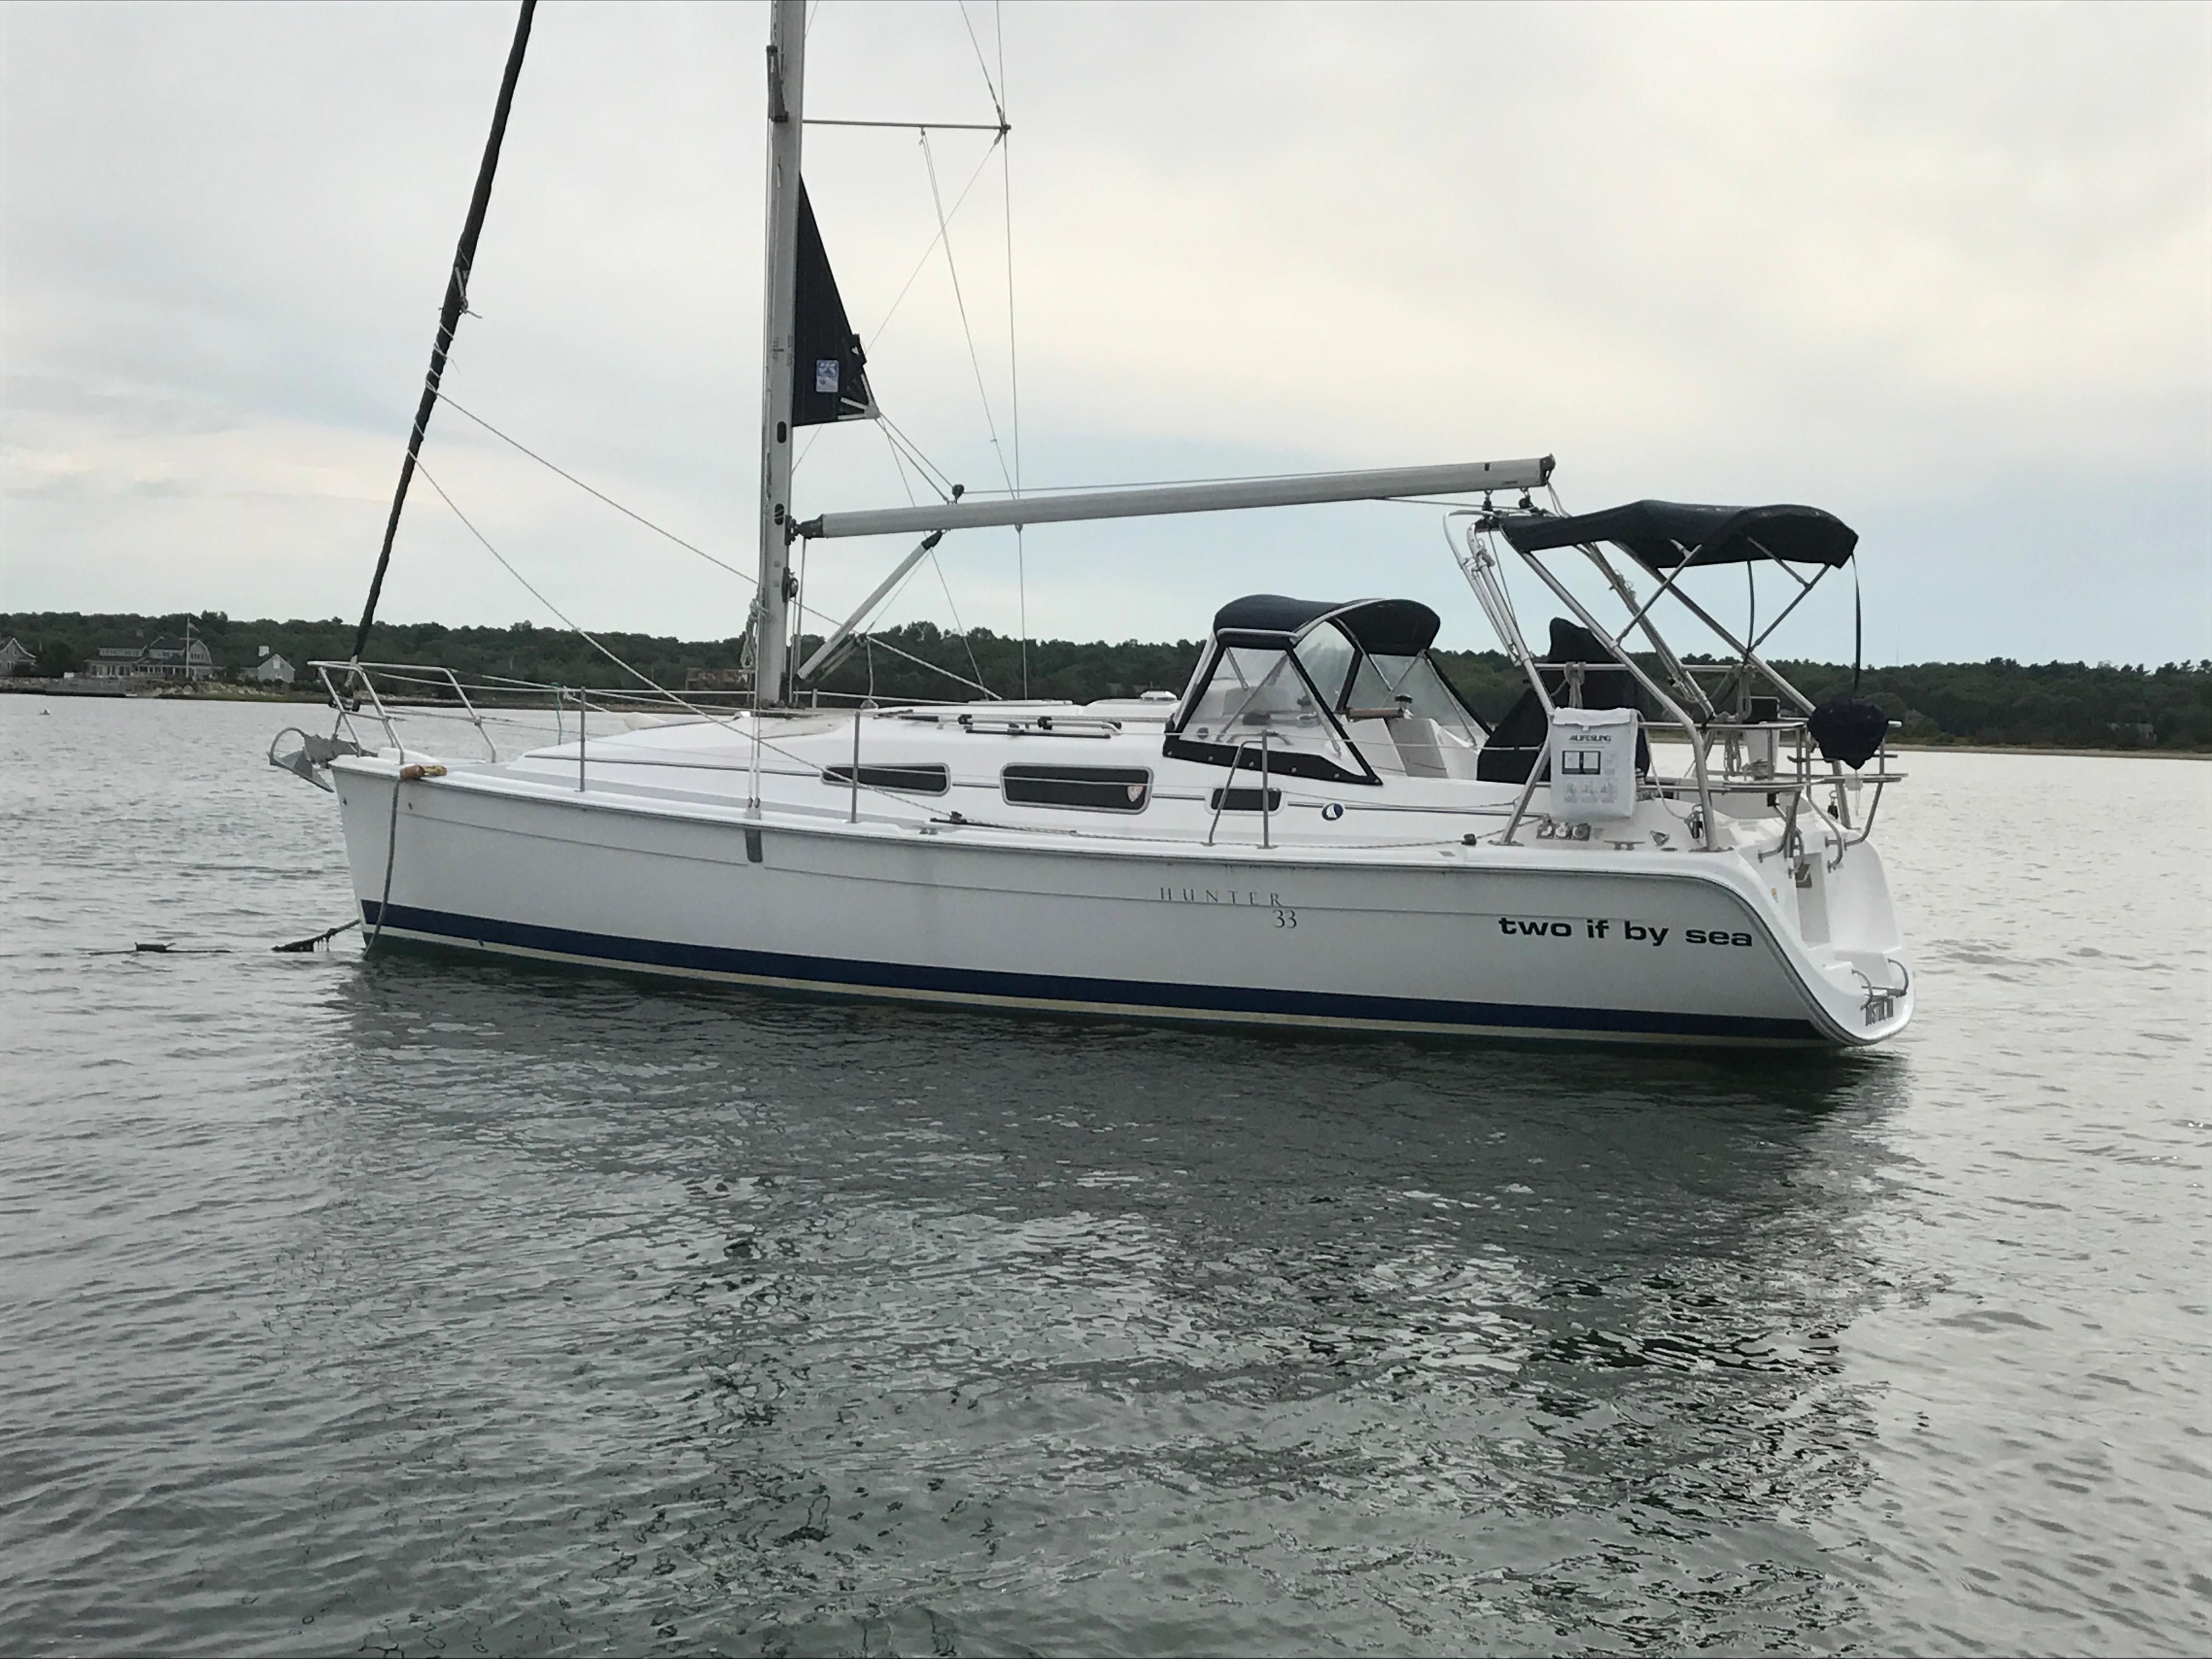 33 ft sailboat for sale